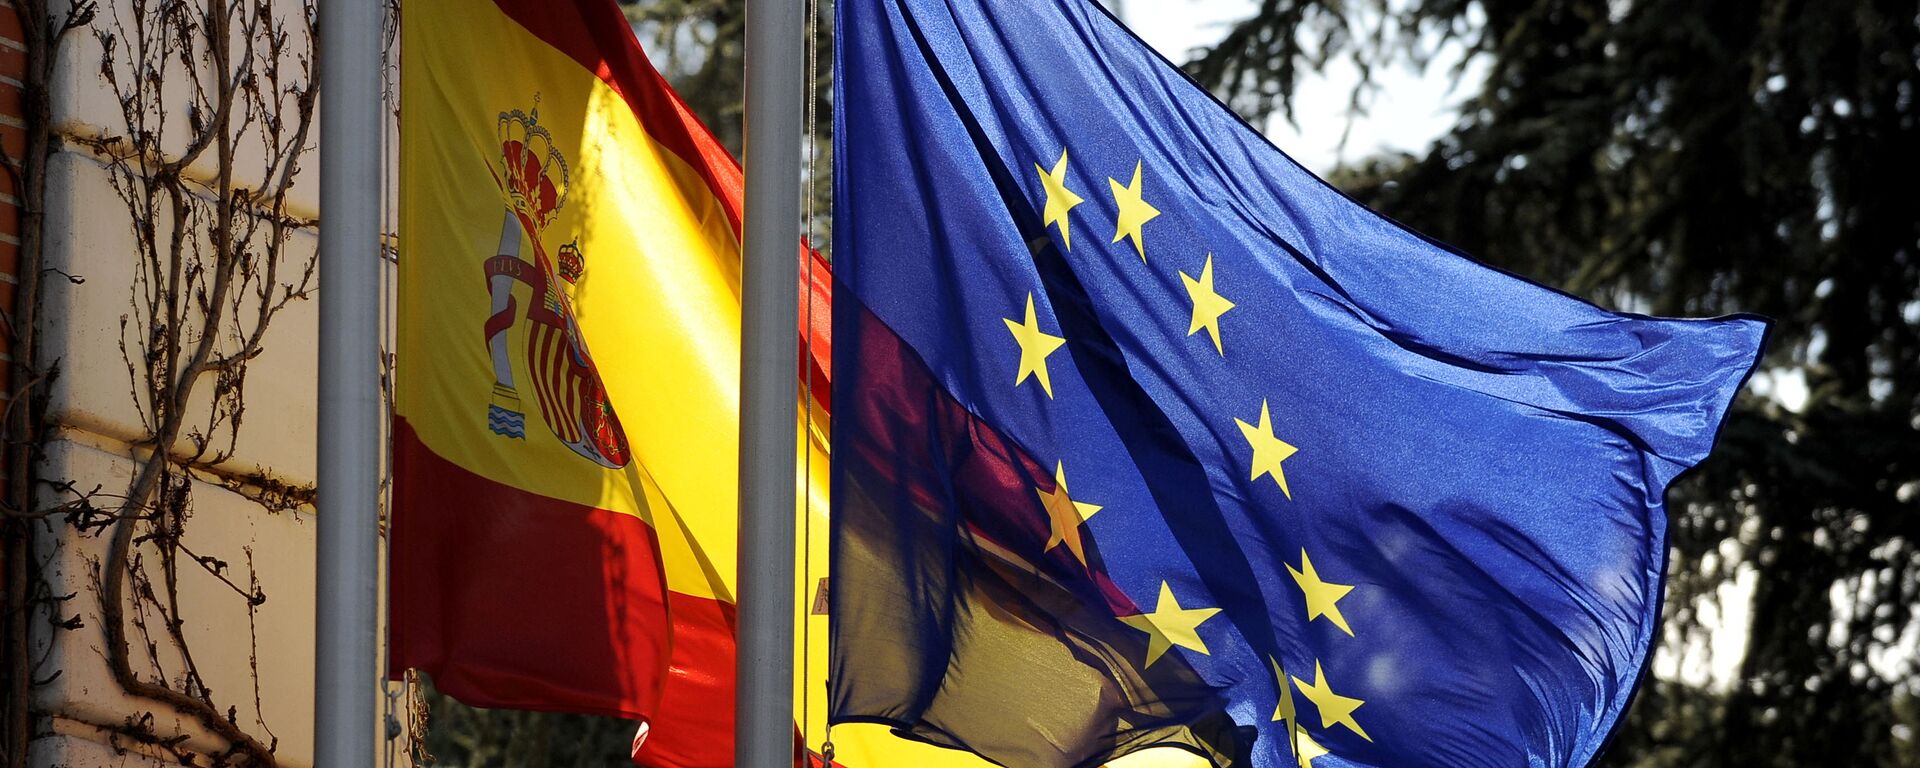 The Spanish flag and the European Union flag fly in front of the Moncloa palace in Madrid on January 8, 2010 - Sputnik Mundo, 1920, 30.09.2022